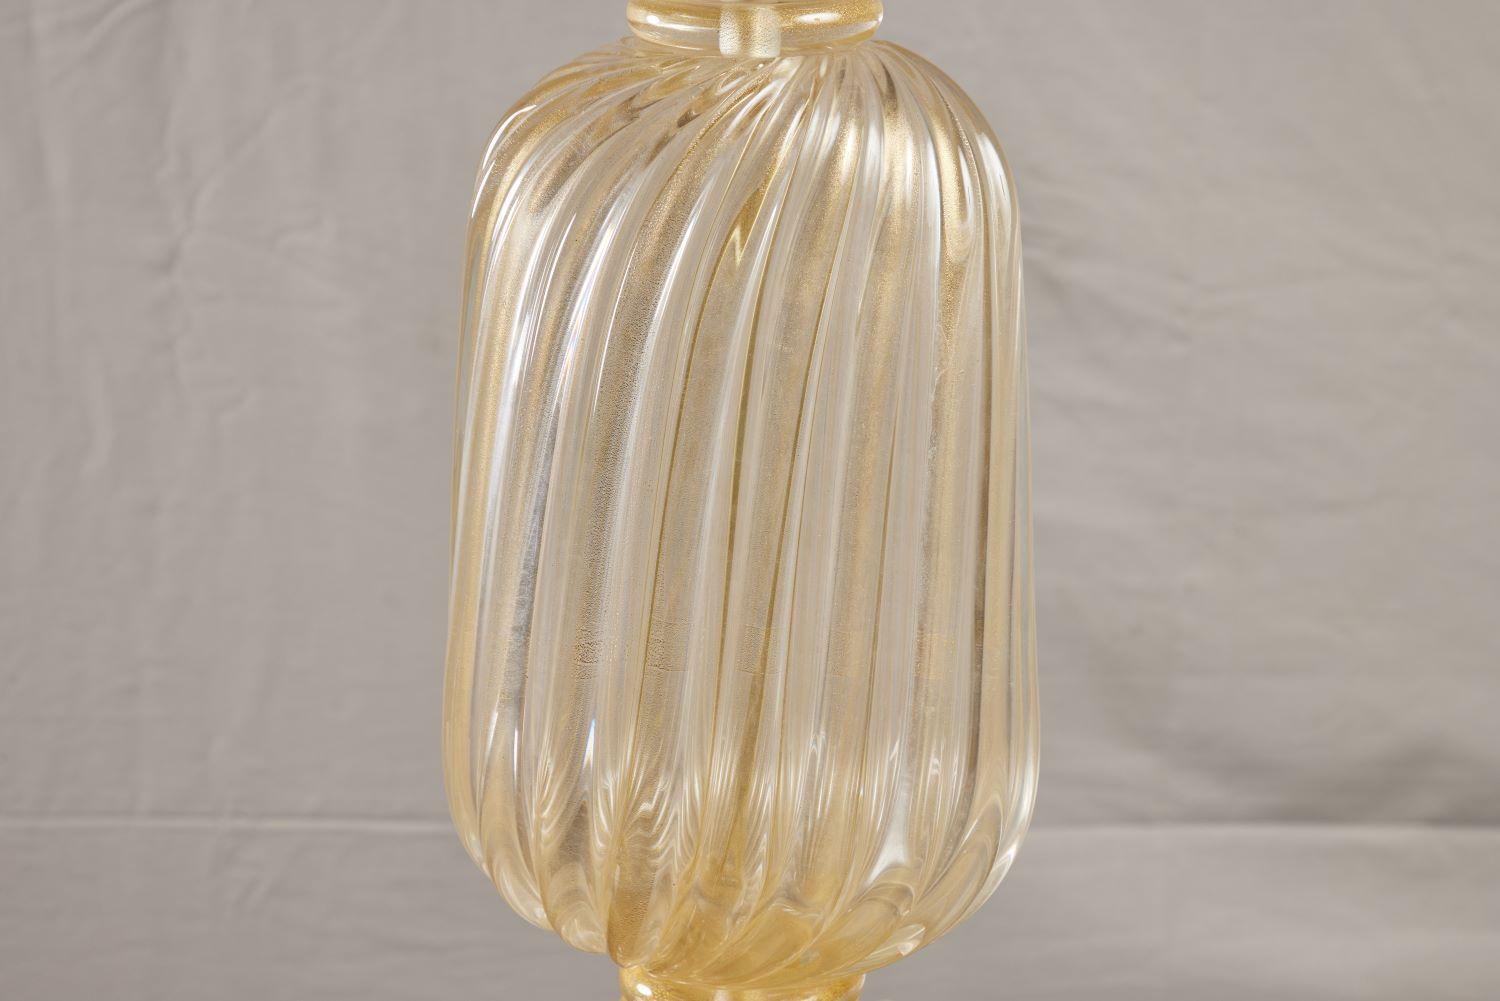 Full Bodied Venetian Glass Swirl Lamp with Gold Leaf In Good Condition For Sale In Pasadena, CA